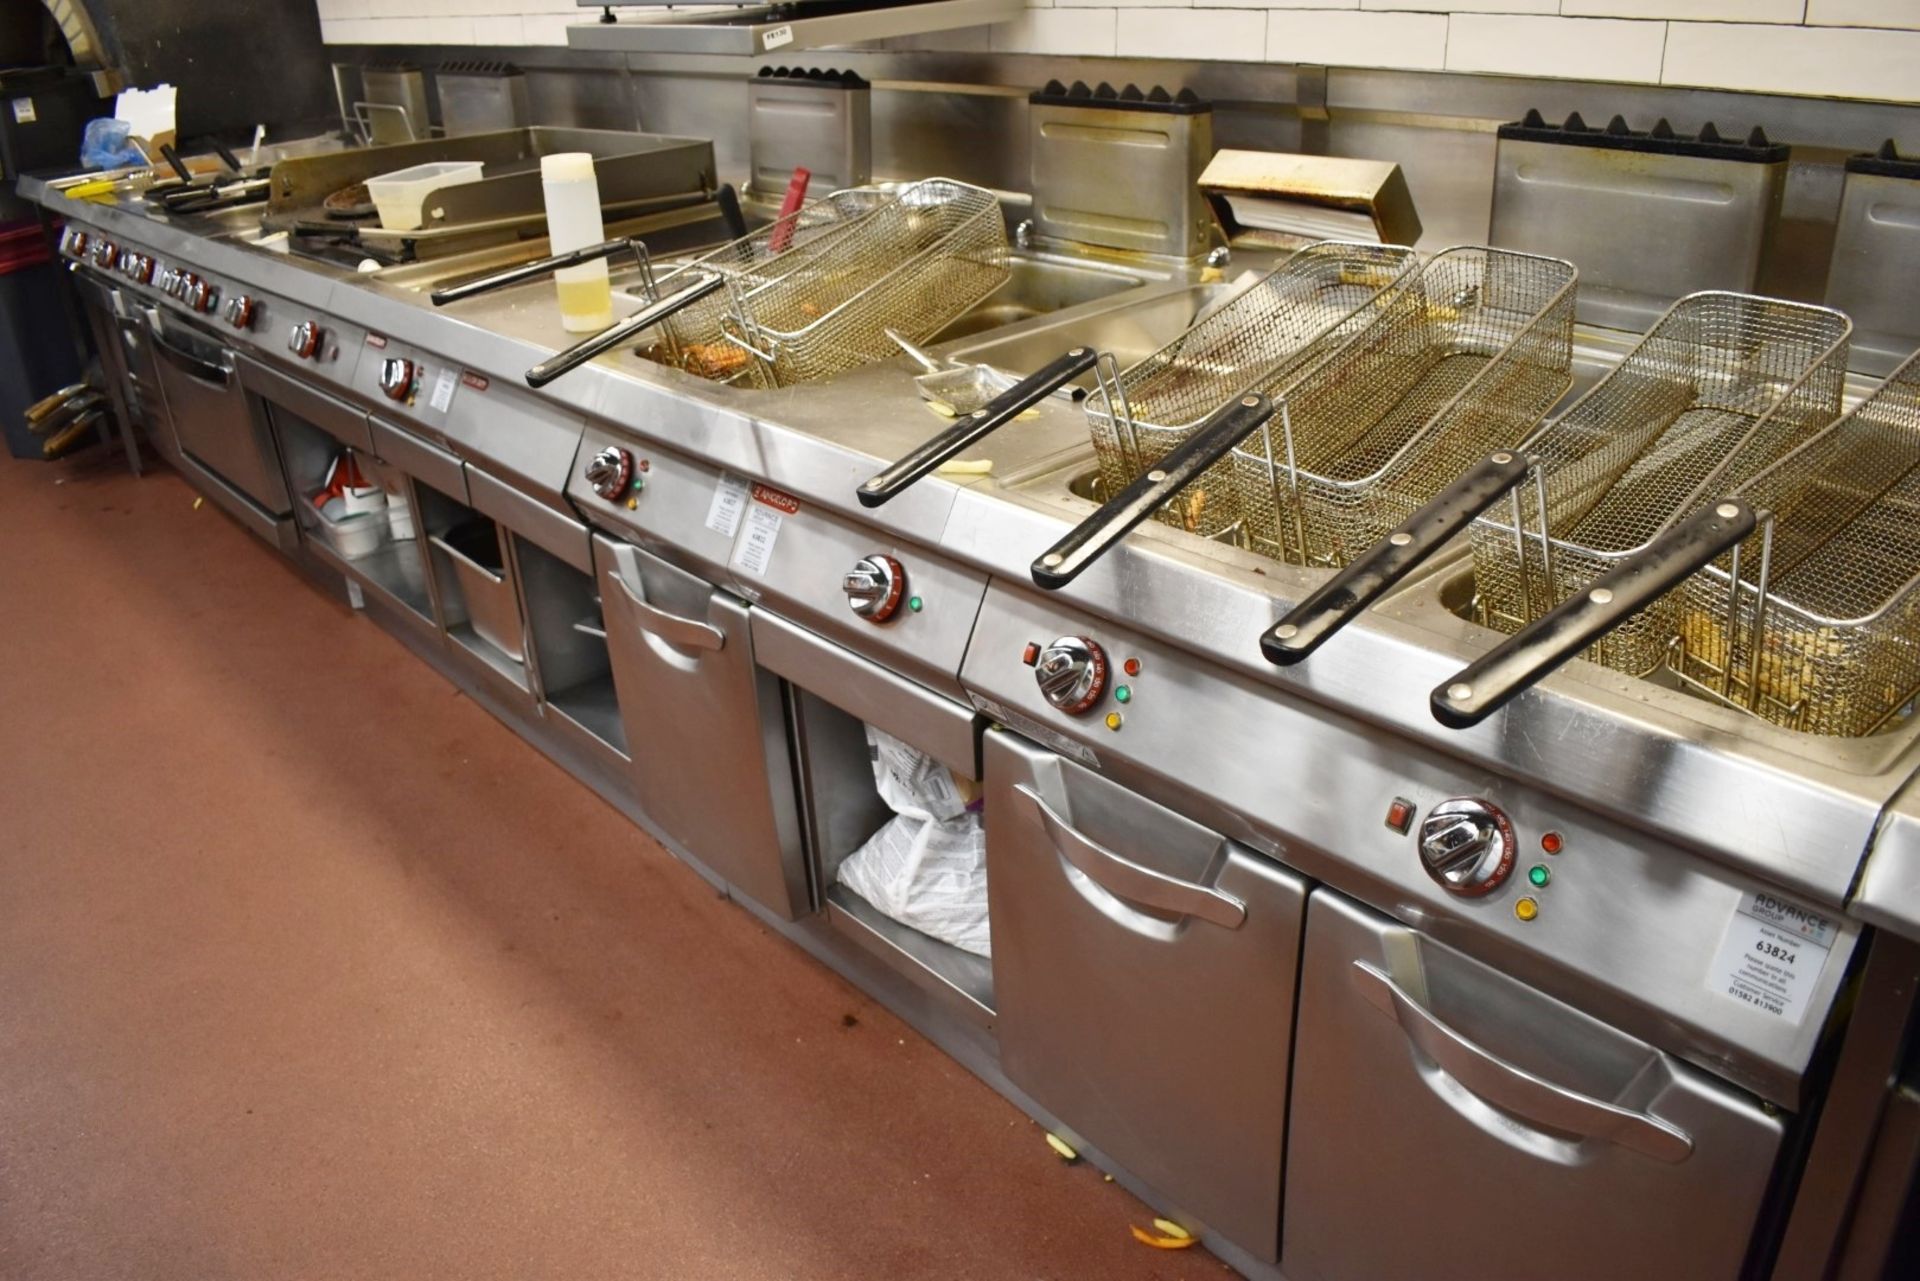 1 x Angelo Po Cooking Station - Approx 6m Length - Includes 11 units - Gas and Electric Powered - - Image 11 of 17